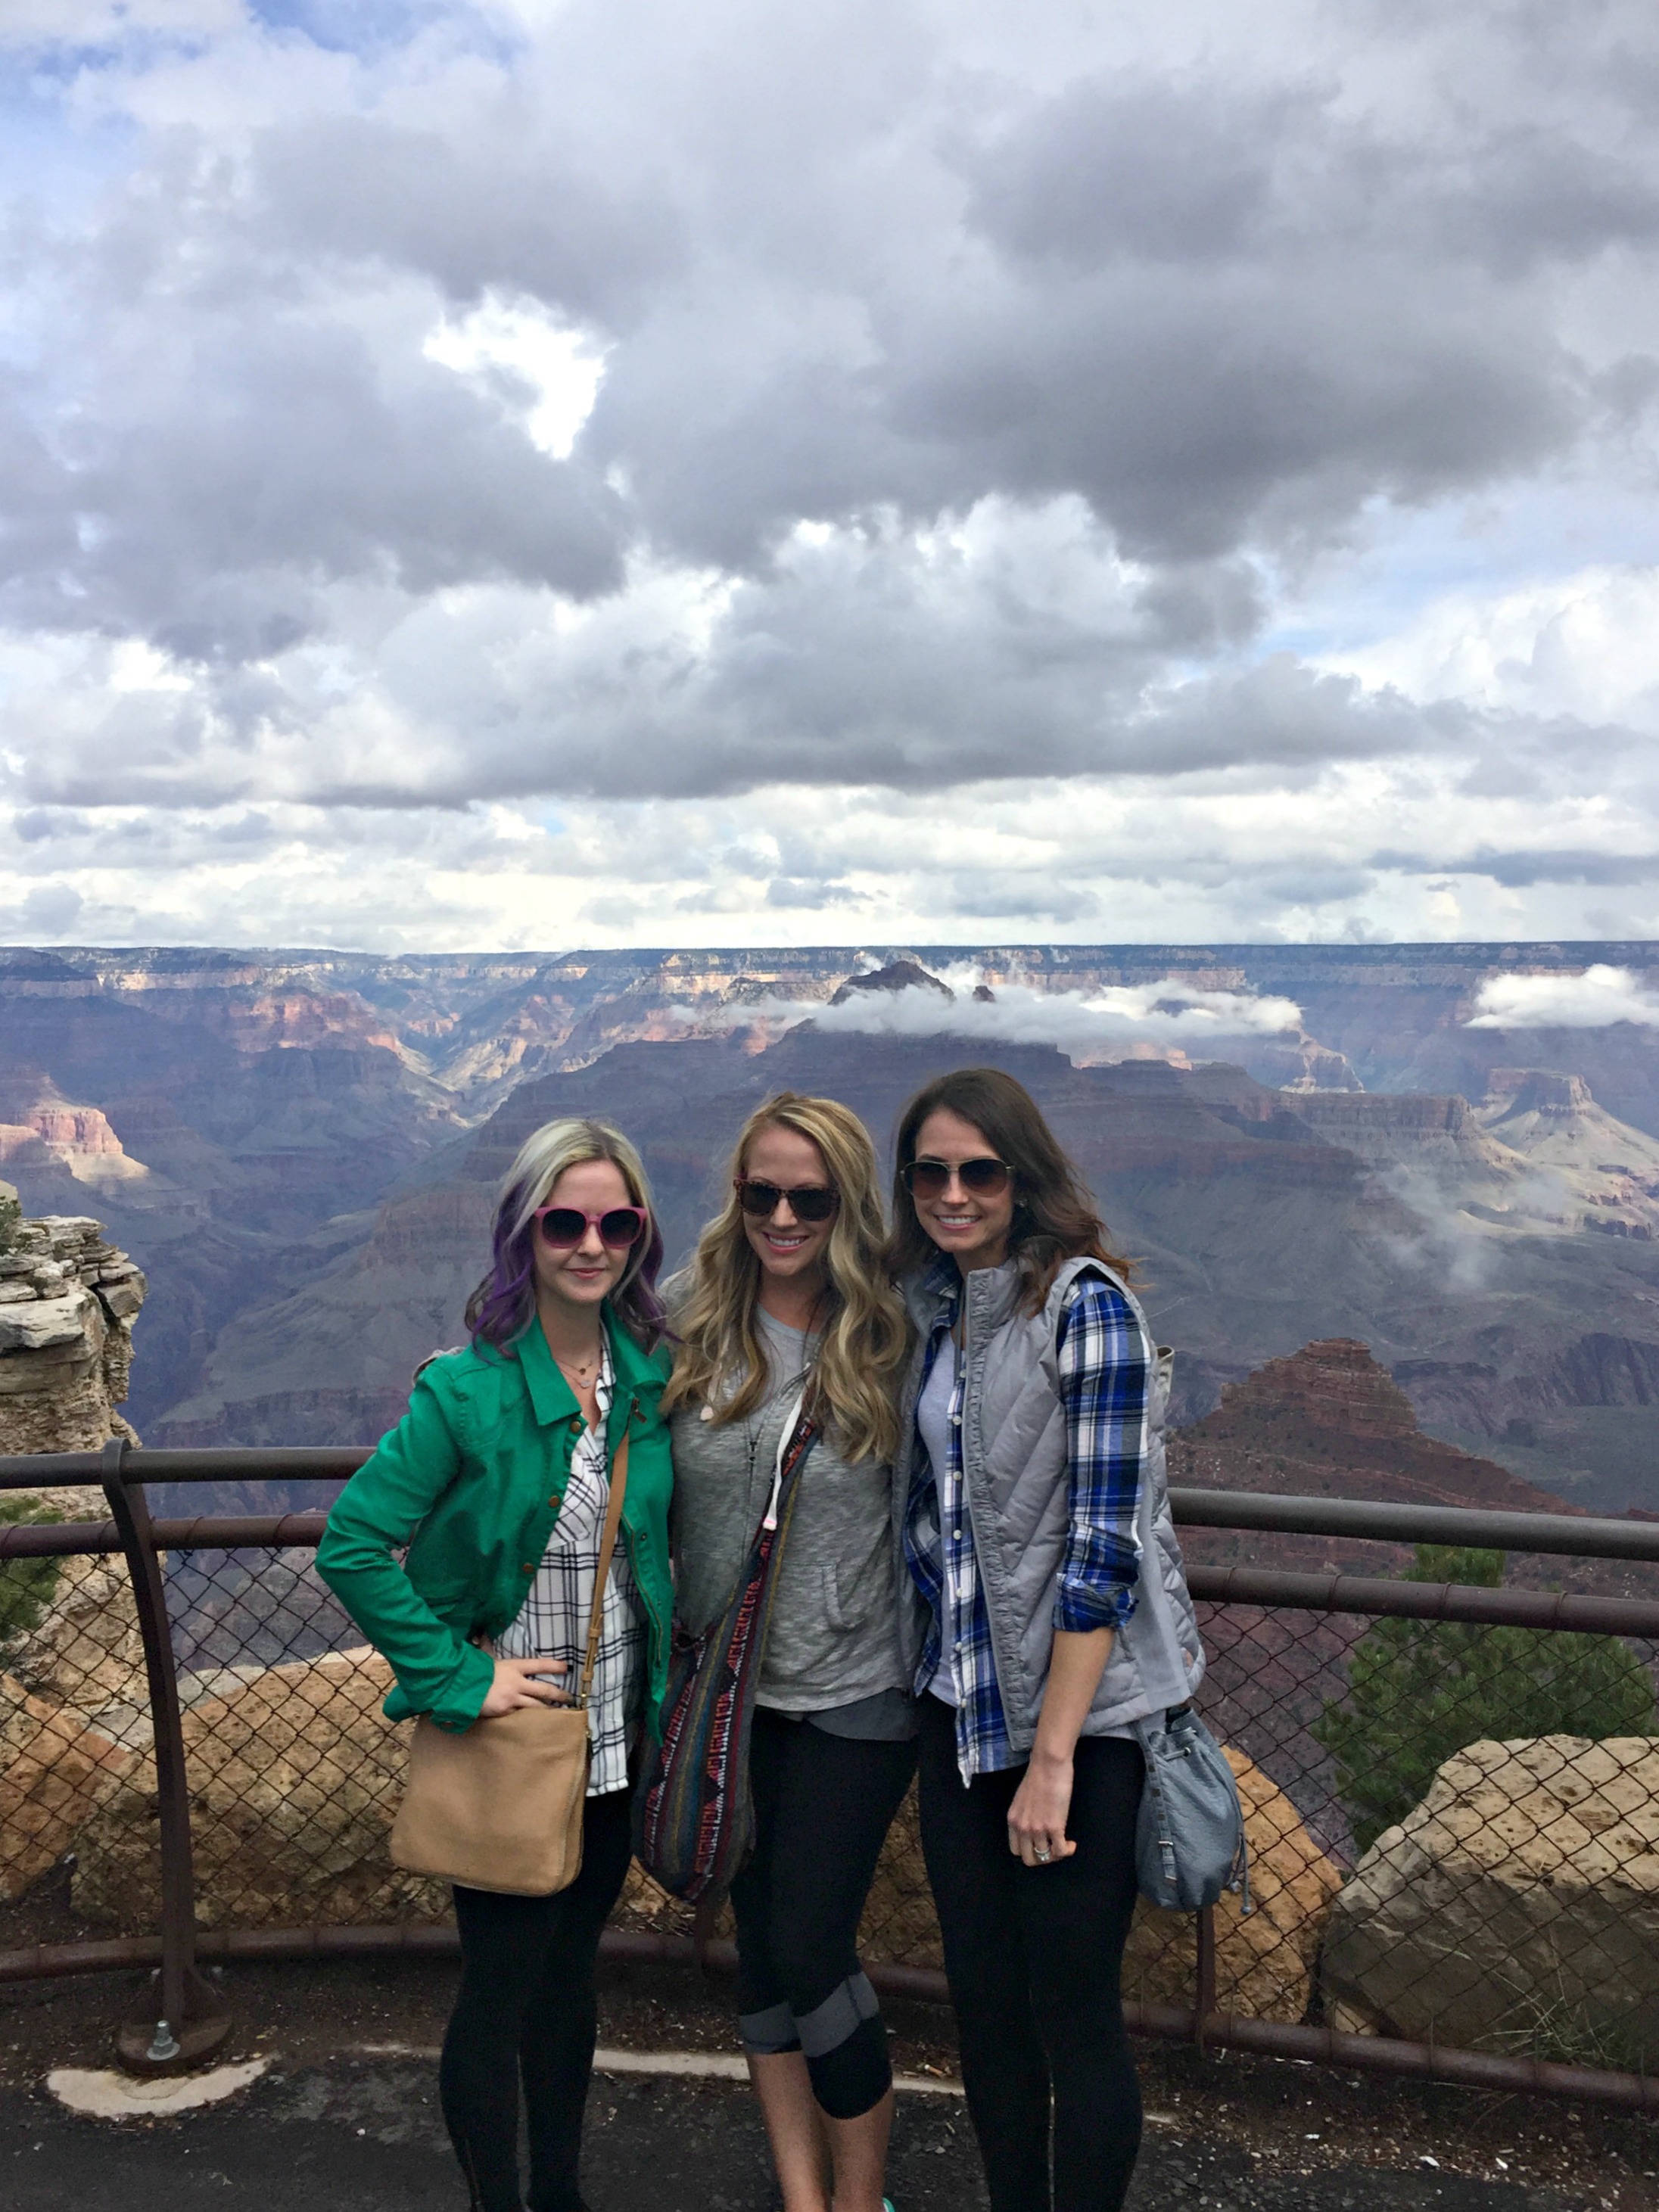 visiting the Grand Canyon - 3 Musketeers